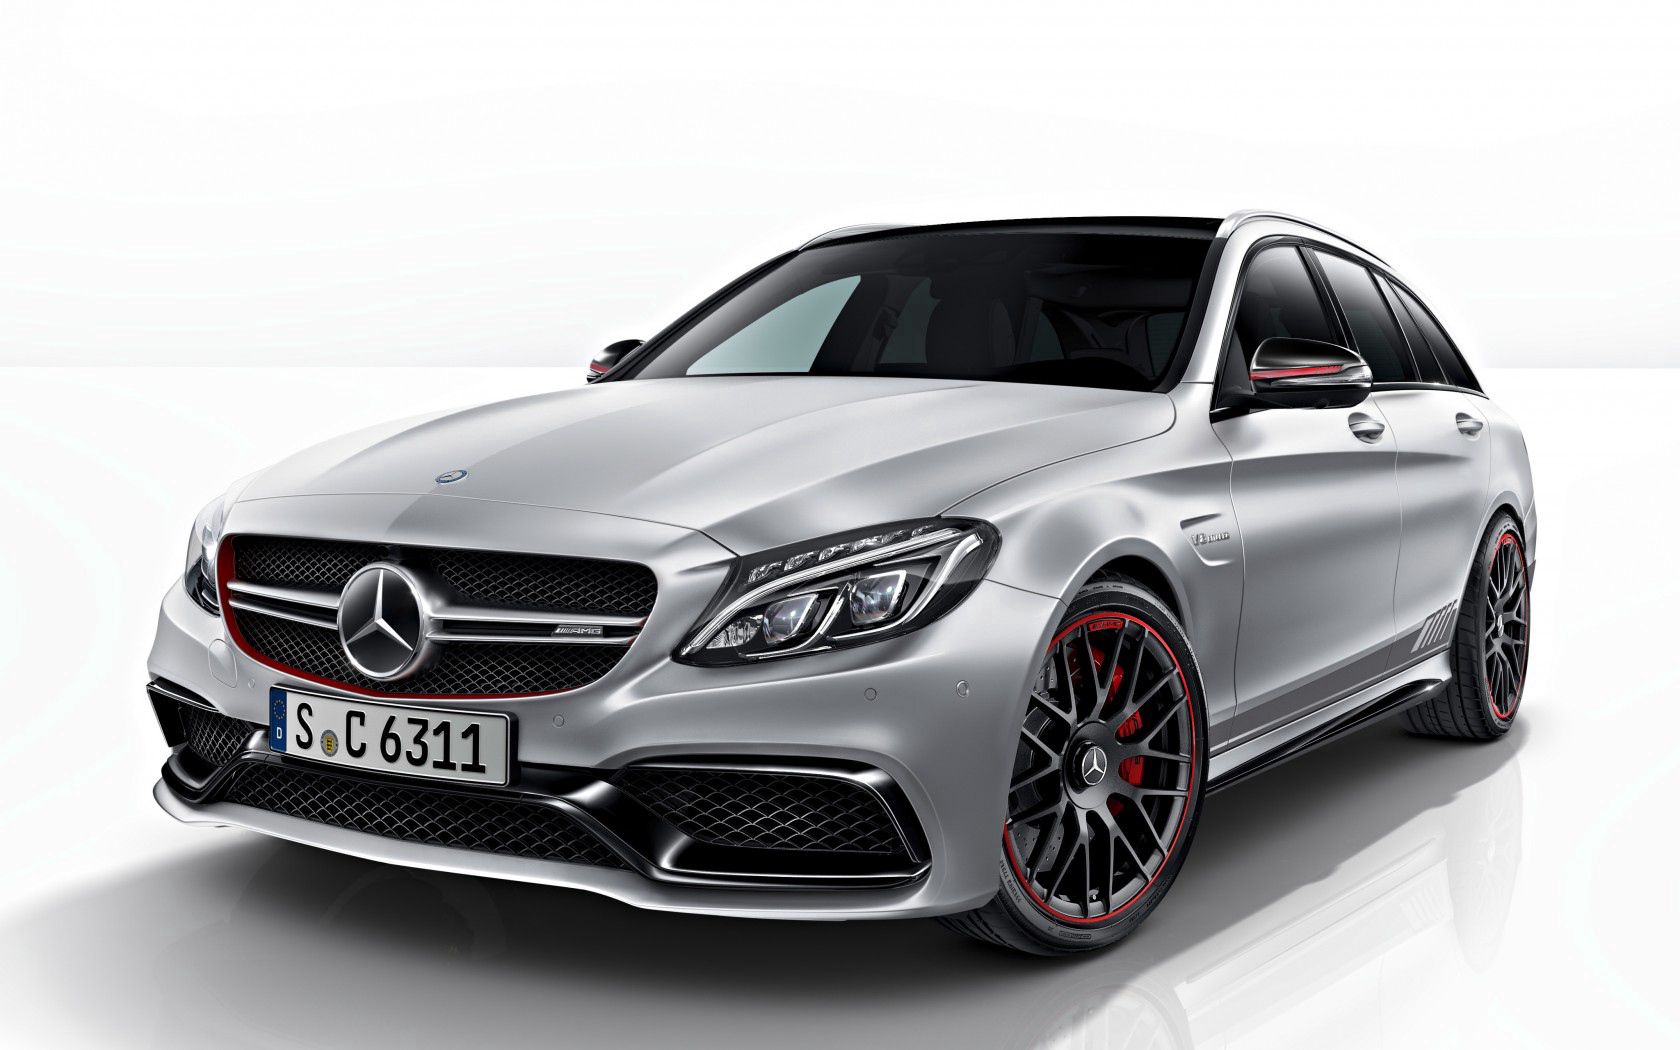 51579 download wallpaper auto, cars, 2014, side view, amg, mercedes, c63, s, estate edition, s205 screensavers and pictures for free